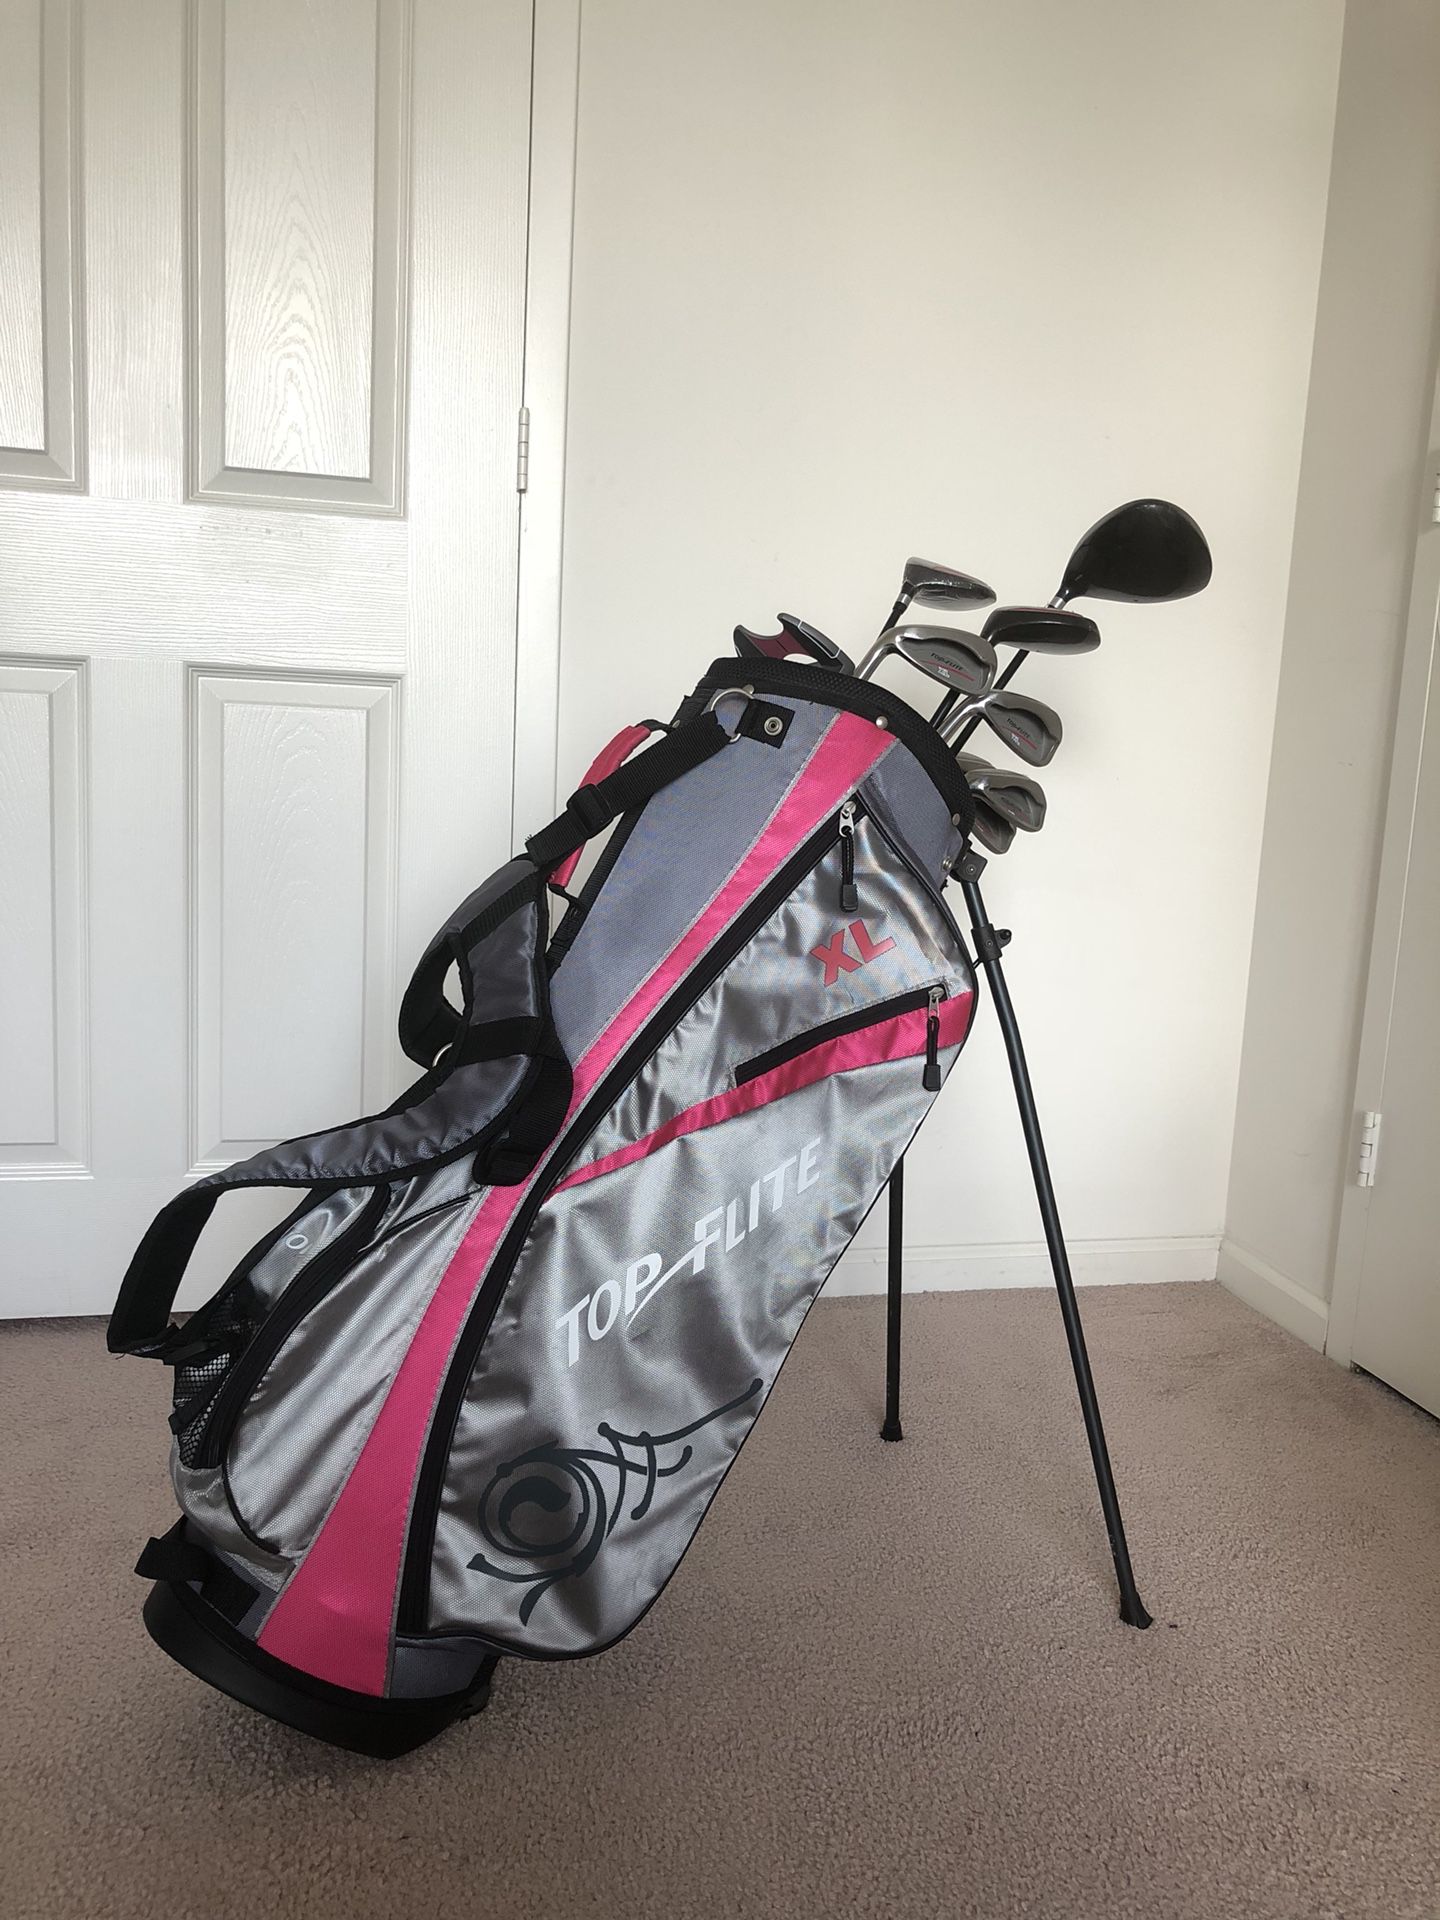 Top Flite woman’s golf clubs (left handed)